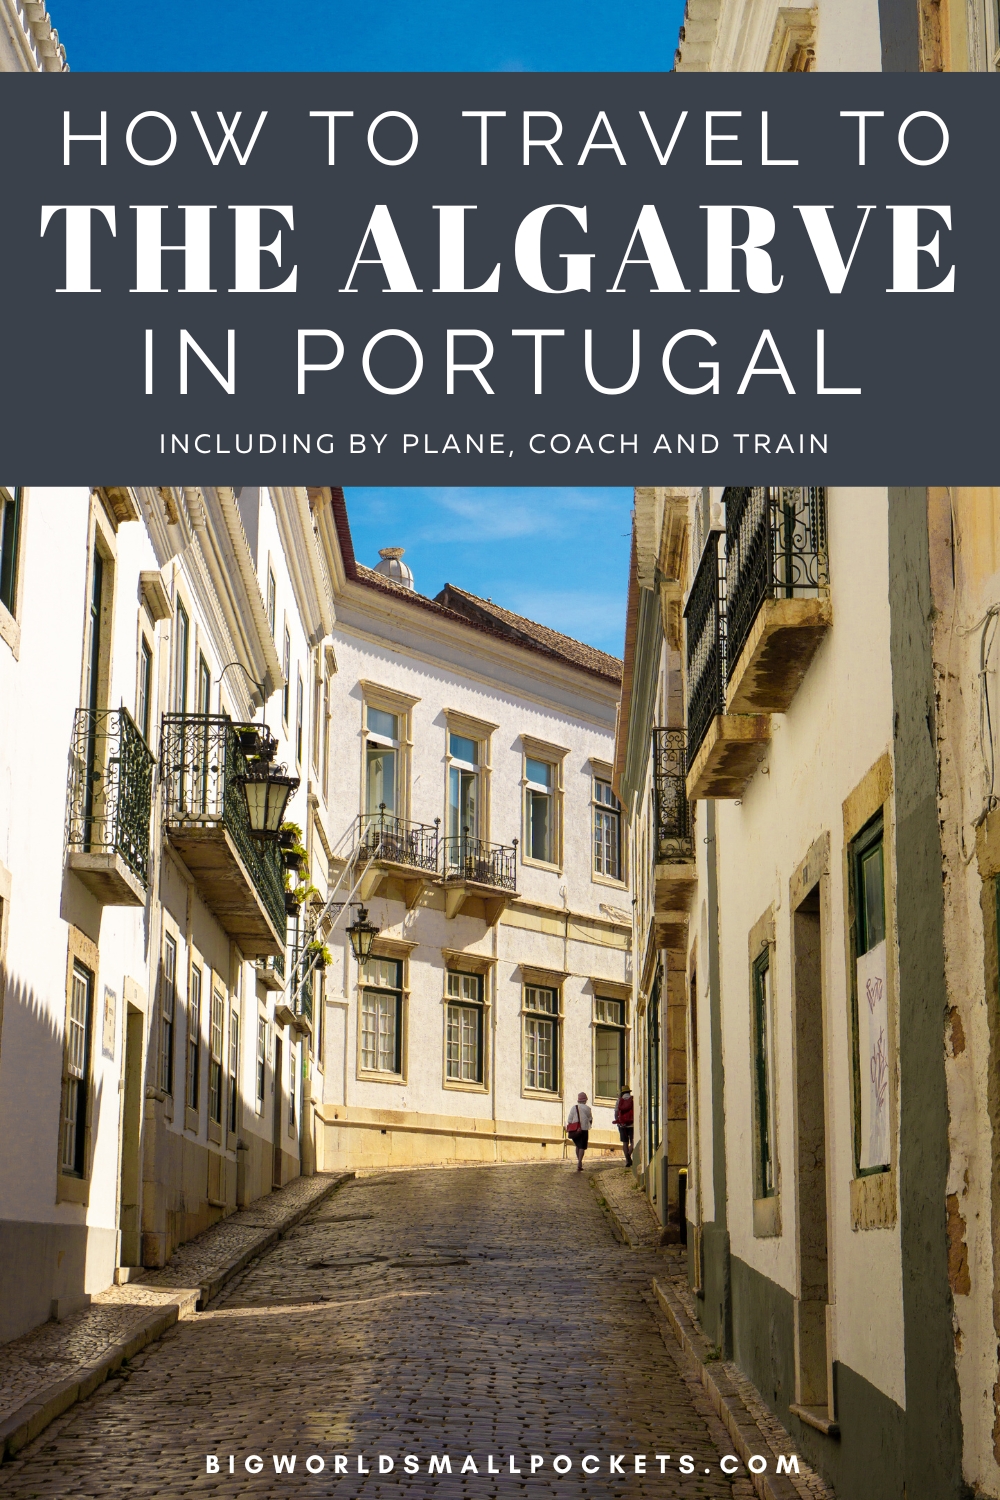 How to Travel to the Algarve in Portugal Airports, Flights, Trains & Coaches